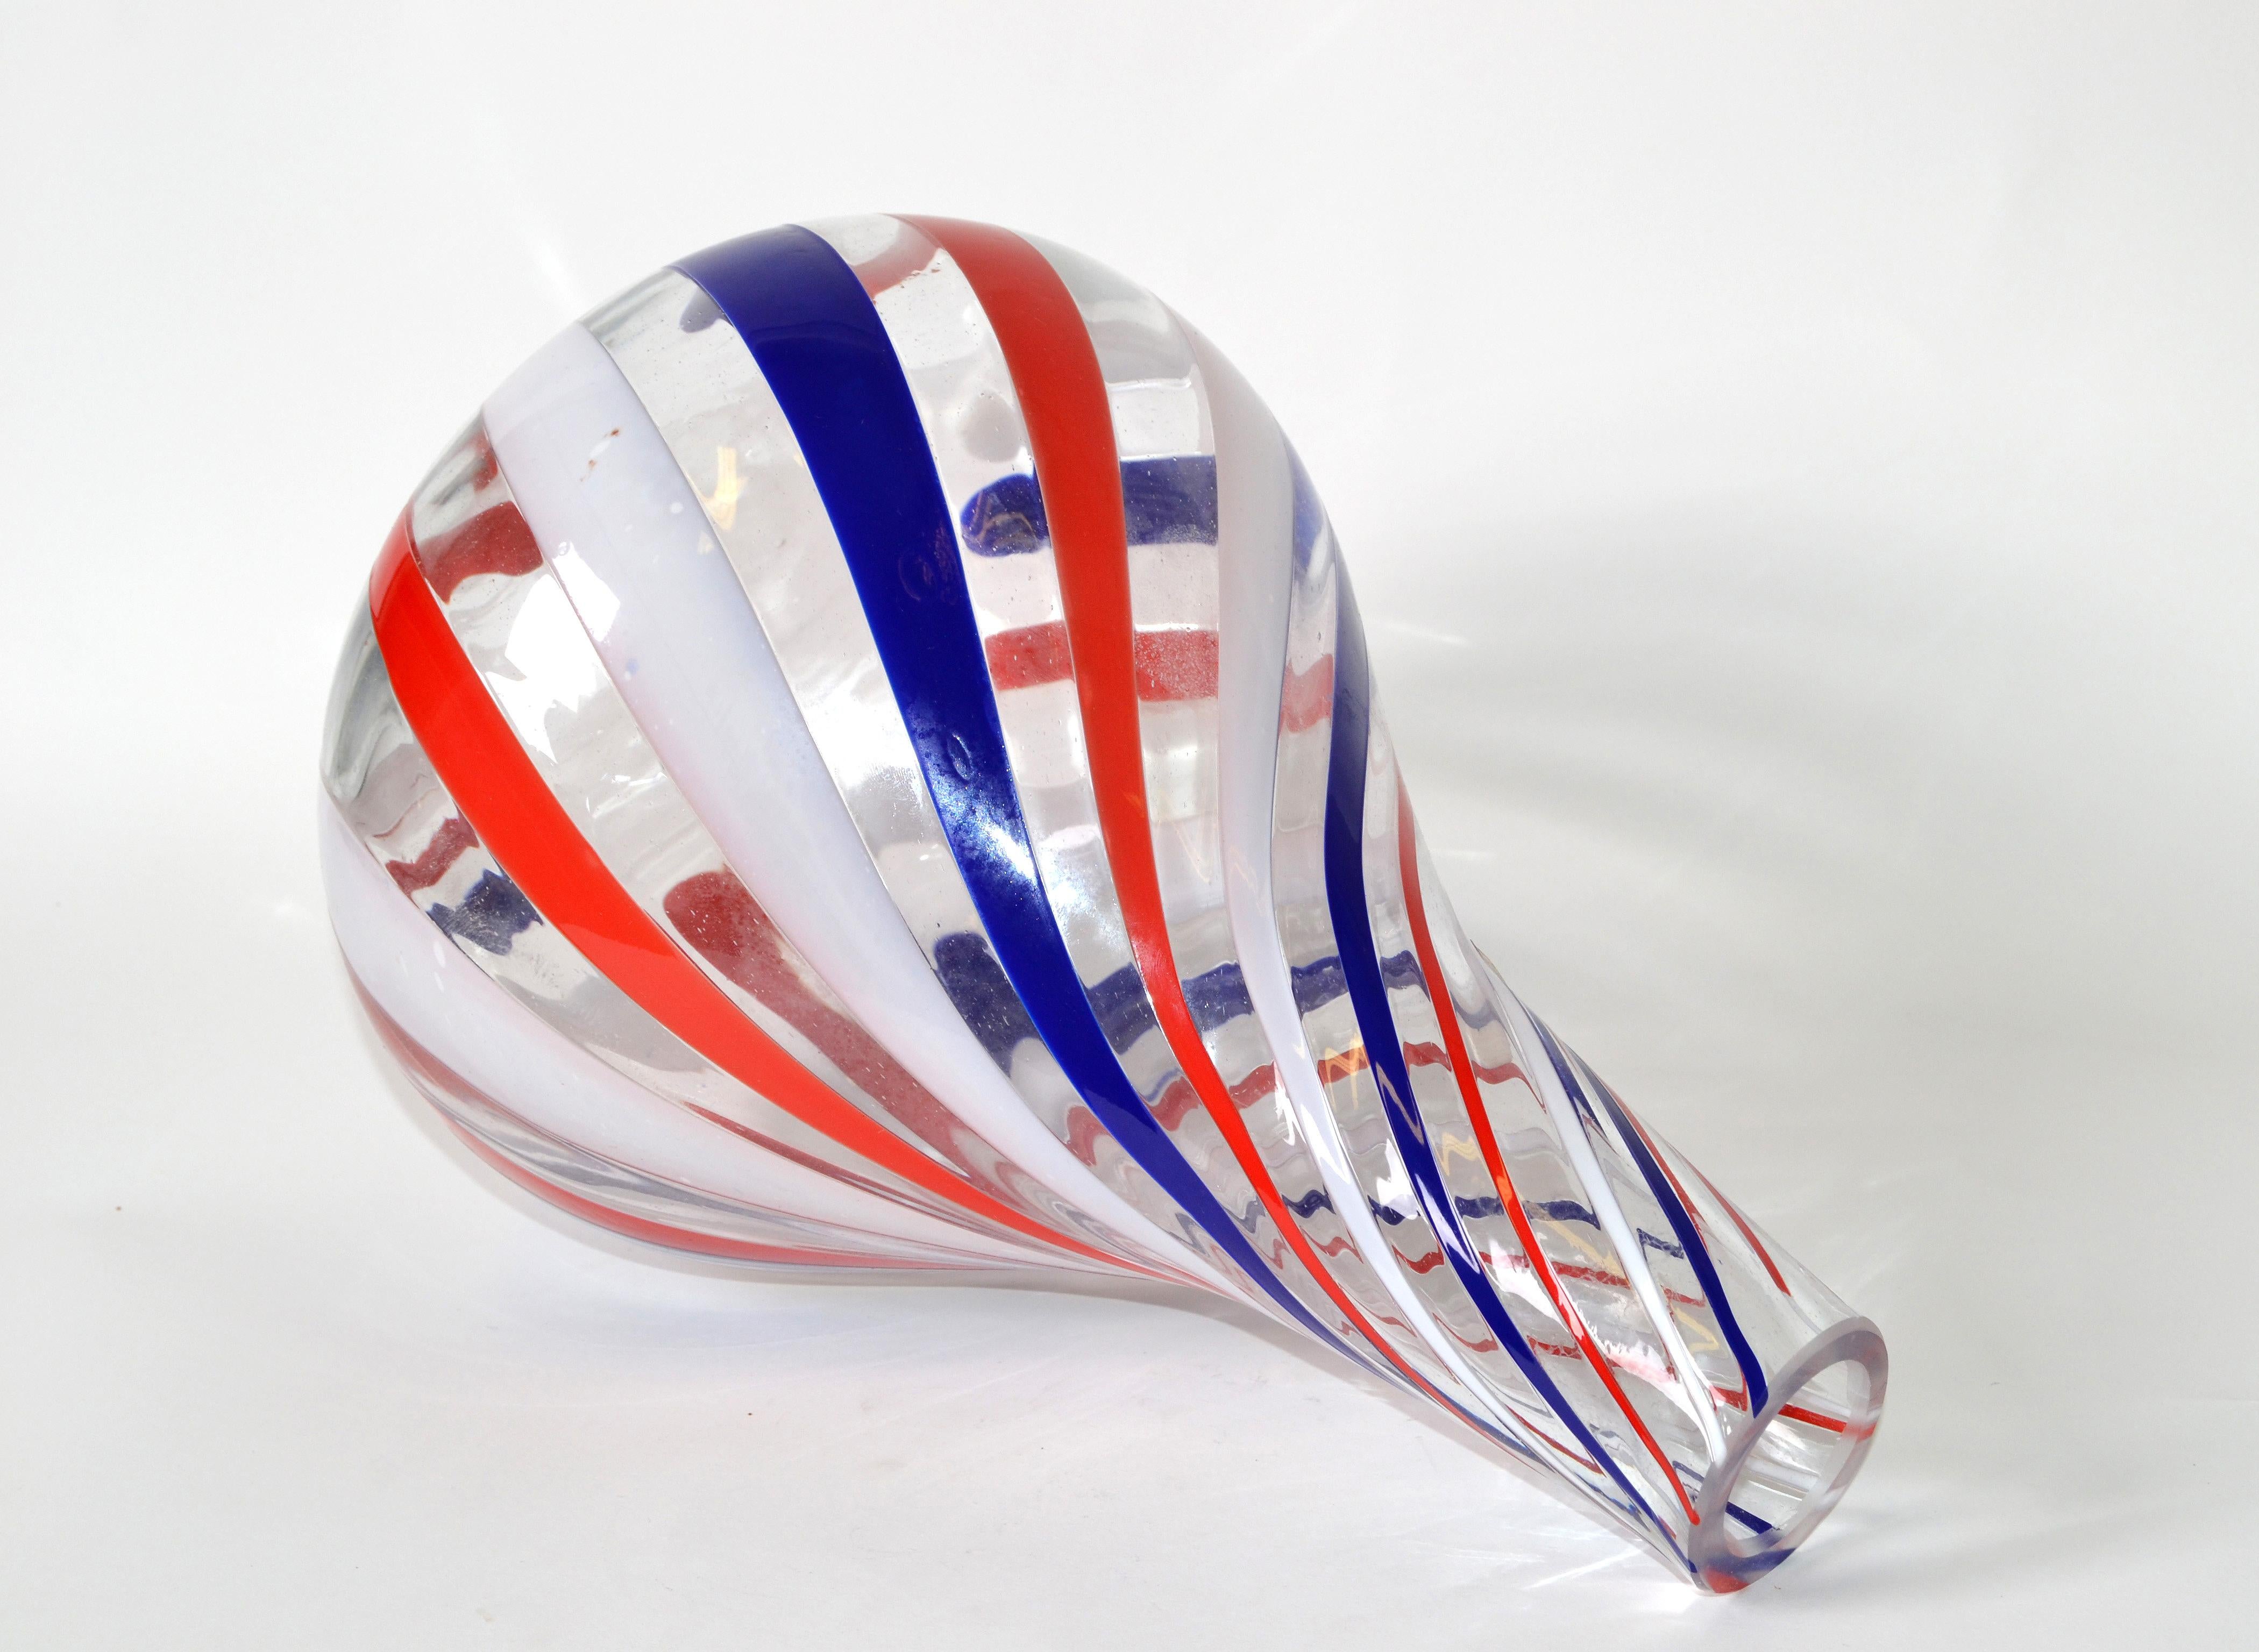 Labeled Italian blown Murano vase in a candy swirl design motif of red, white, blue and clear coloring.
Marked with silver foil label.